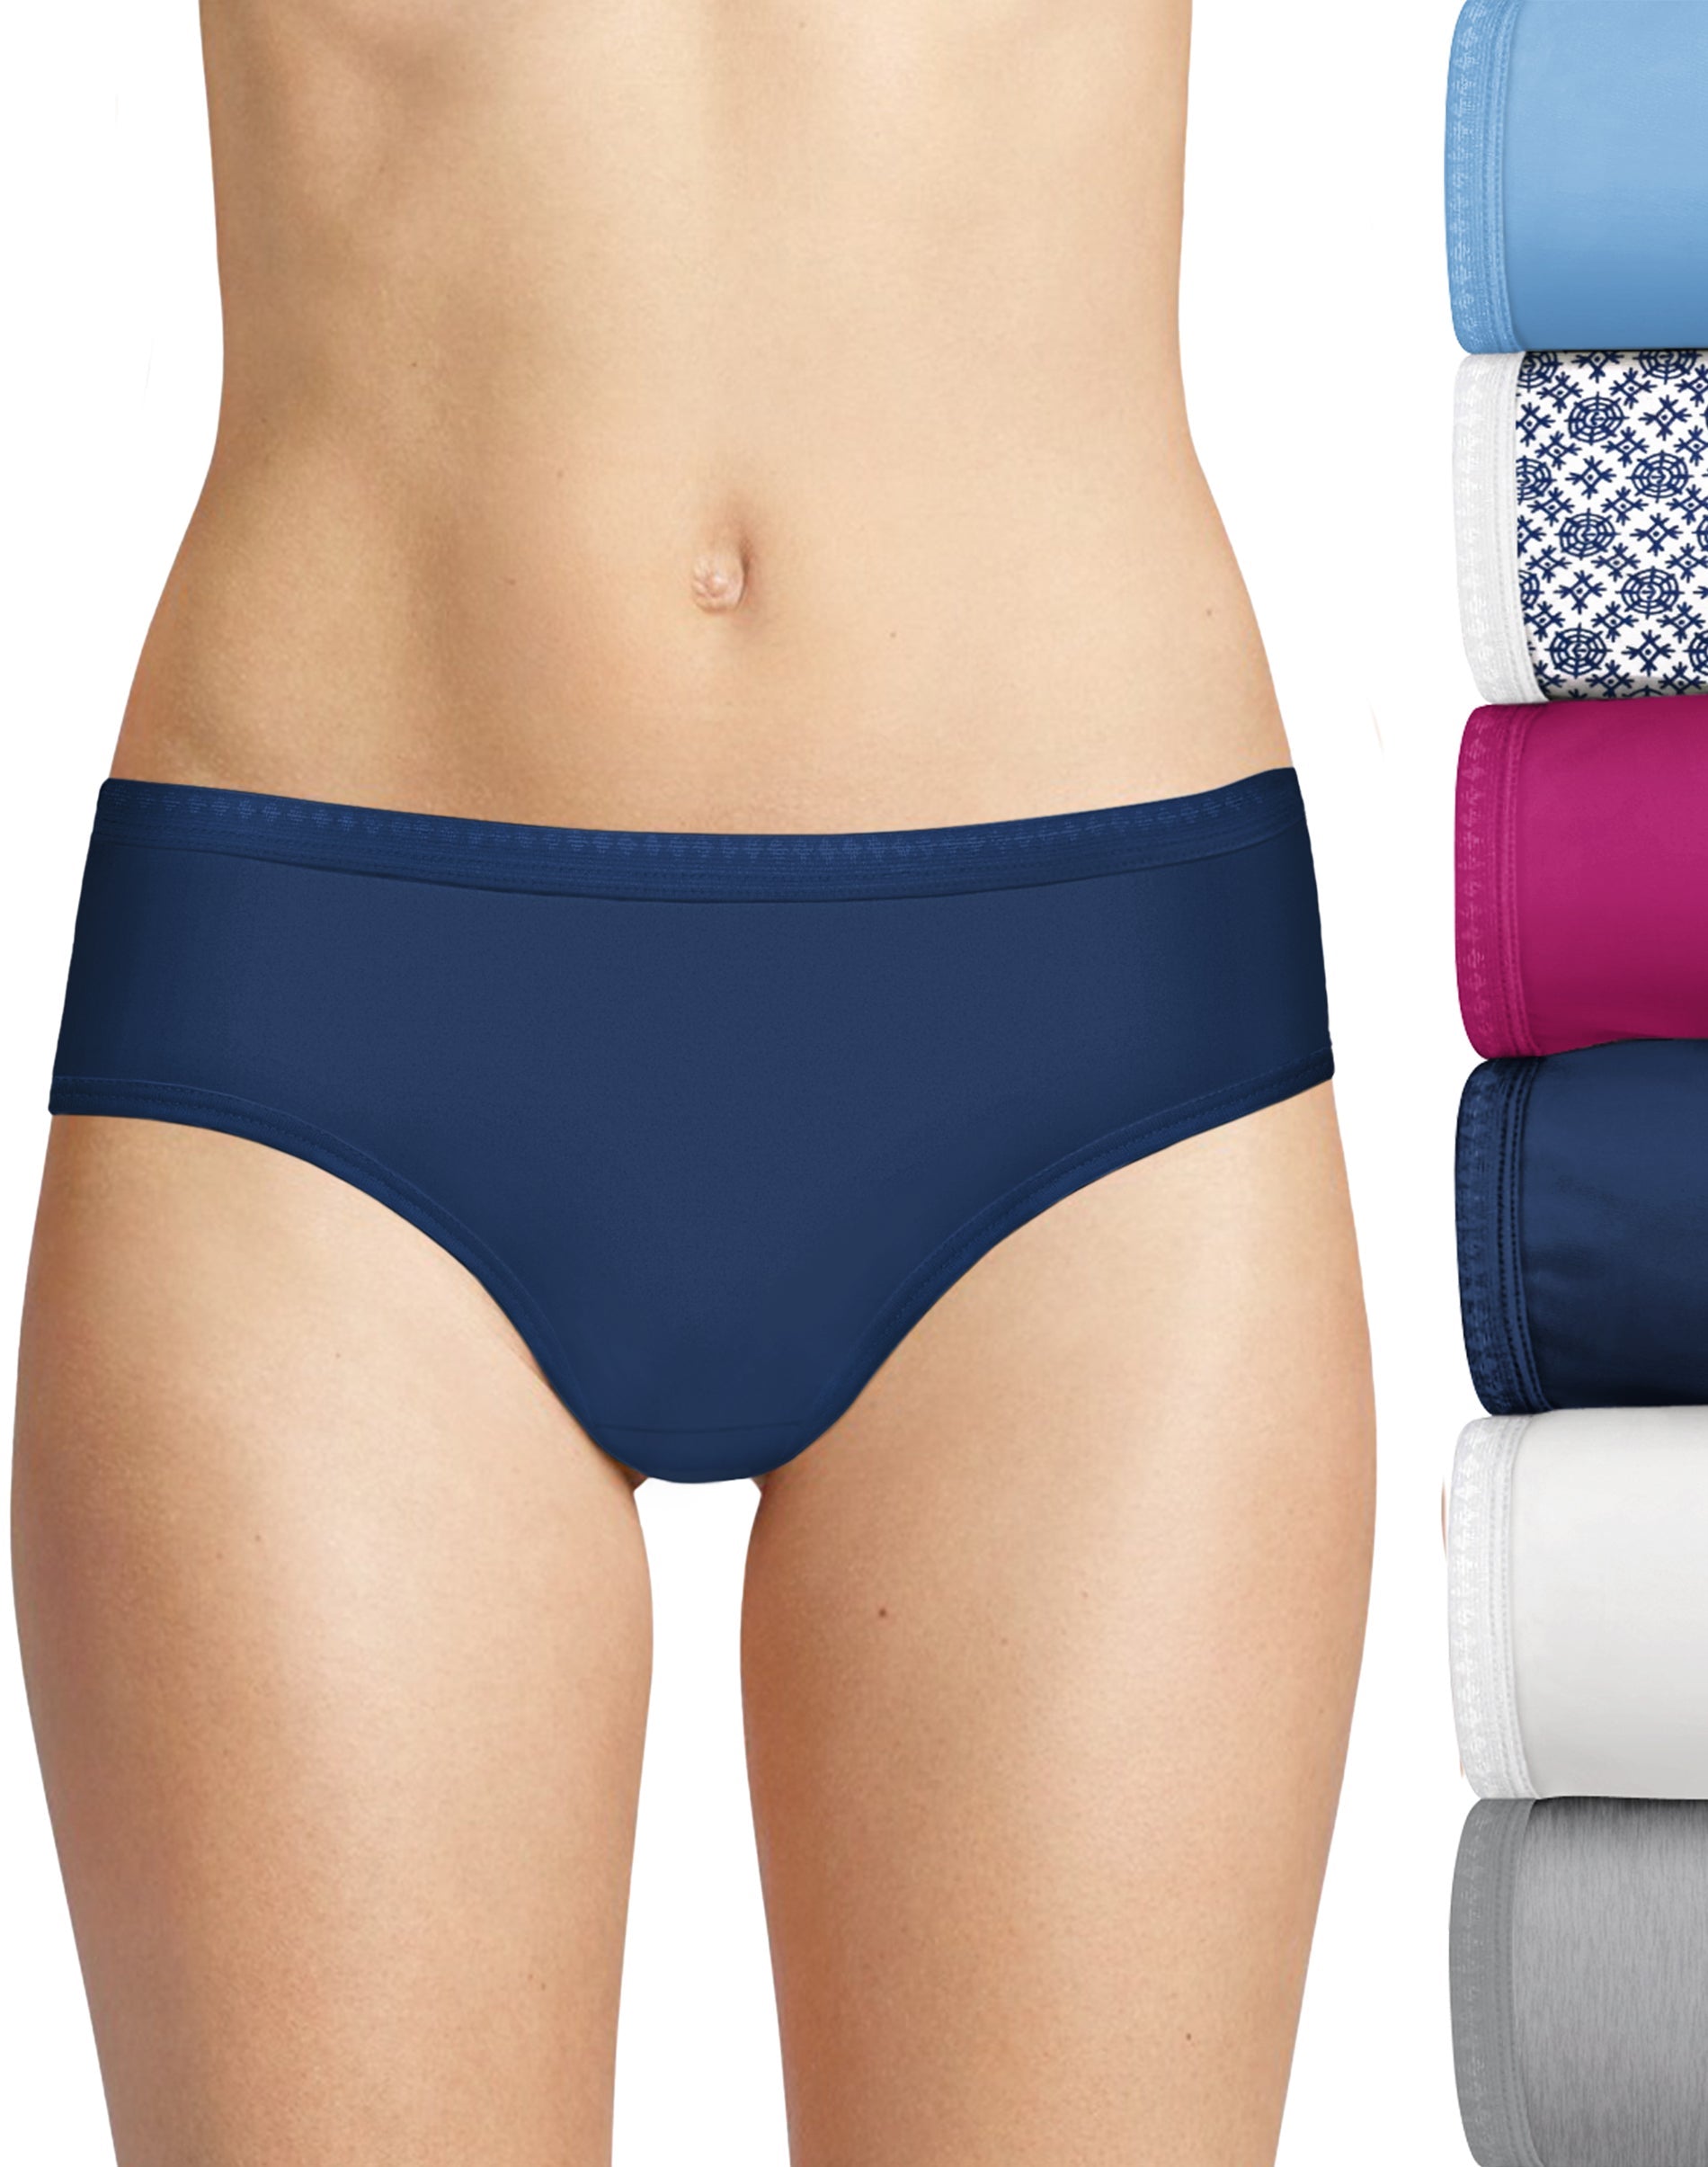 Hanes Hipster 10-Pack Womens Underwear Cool Comfort